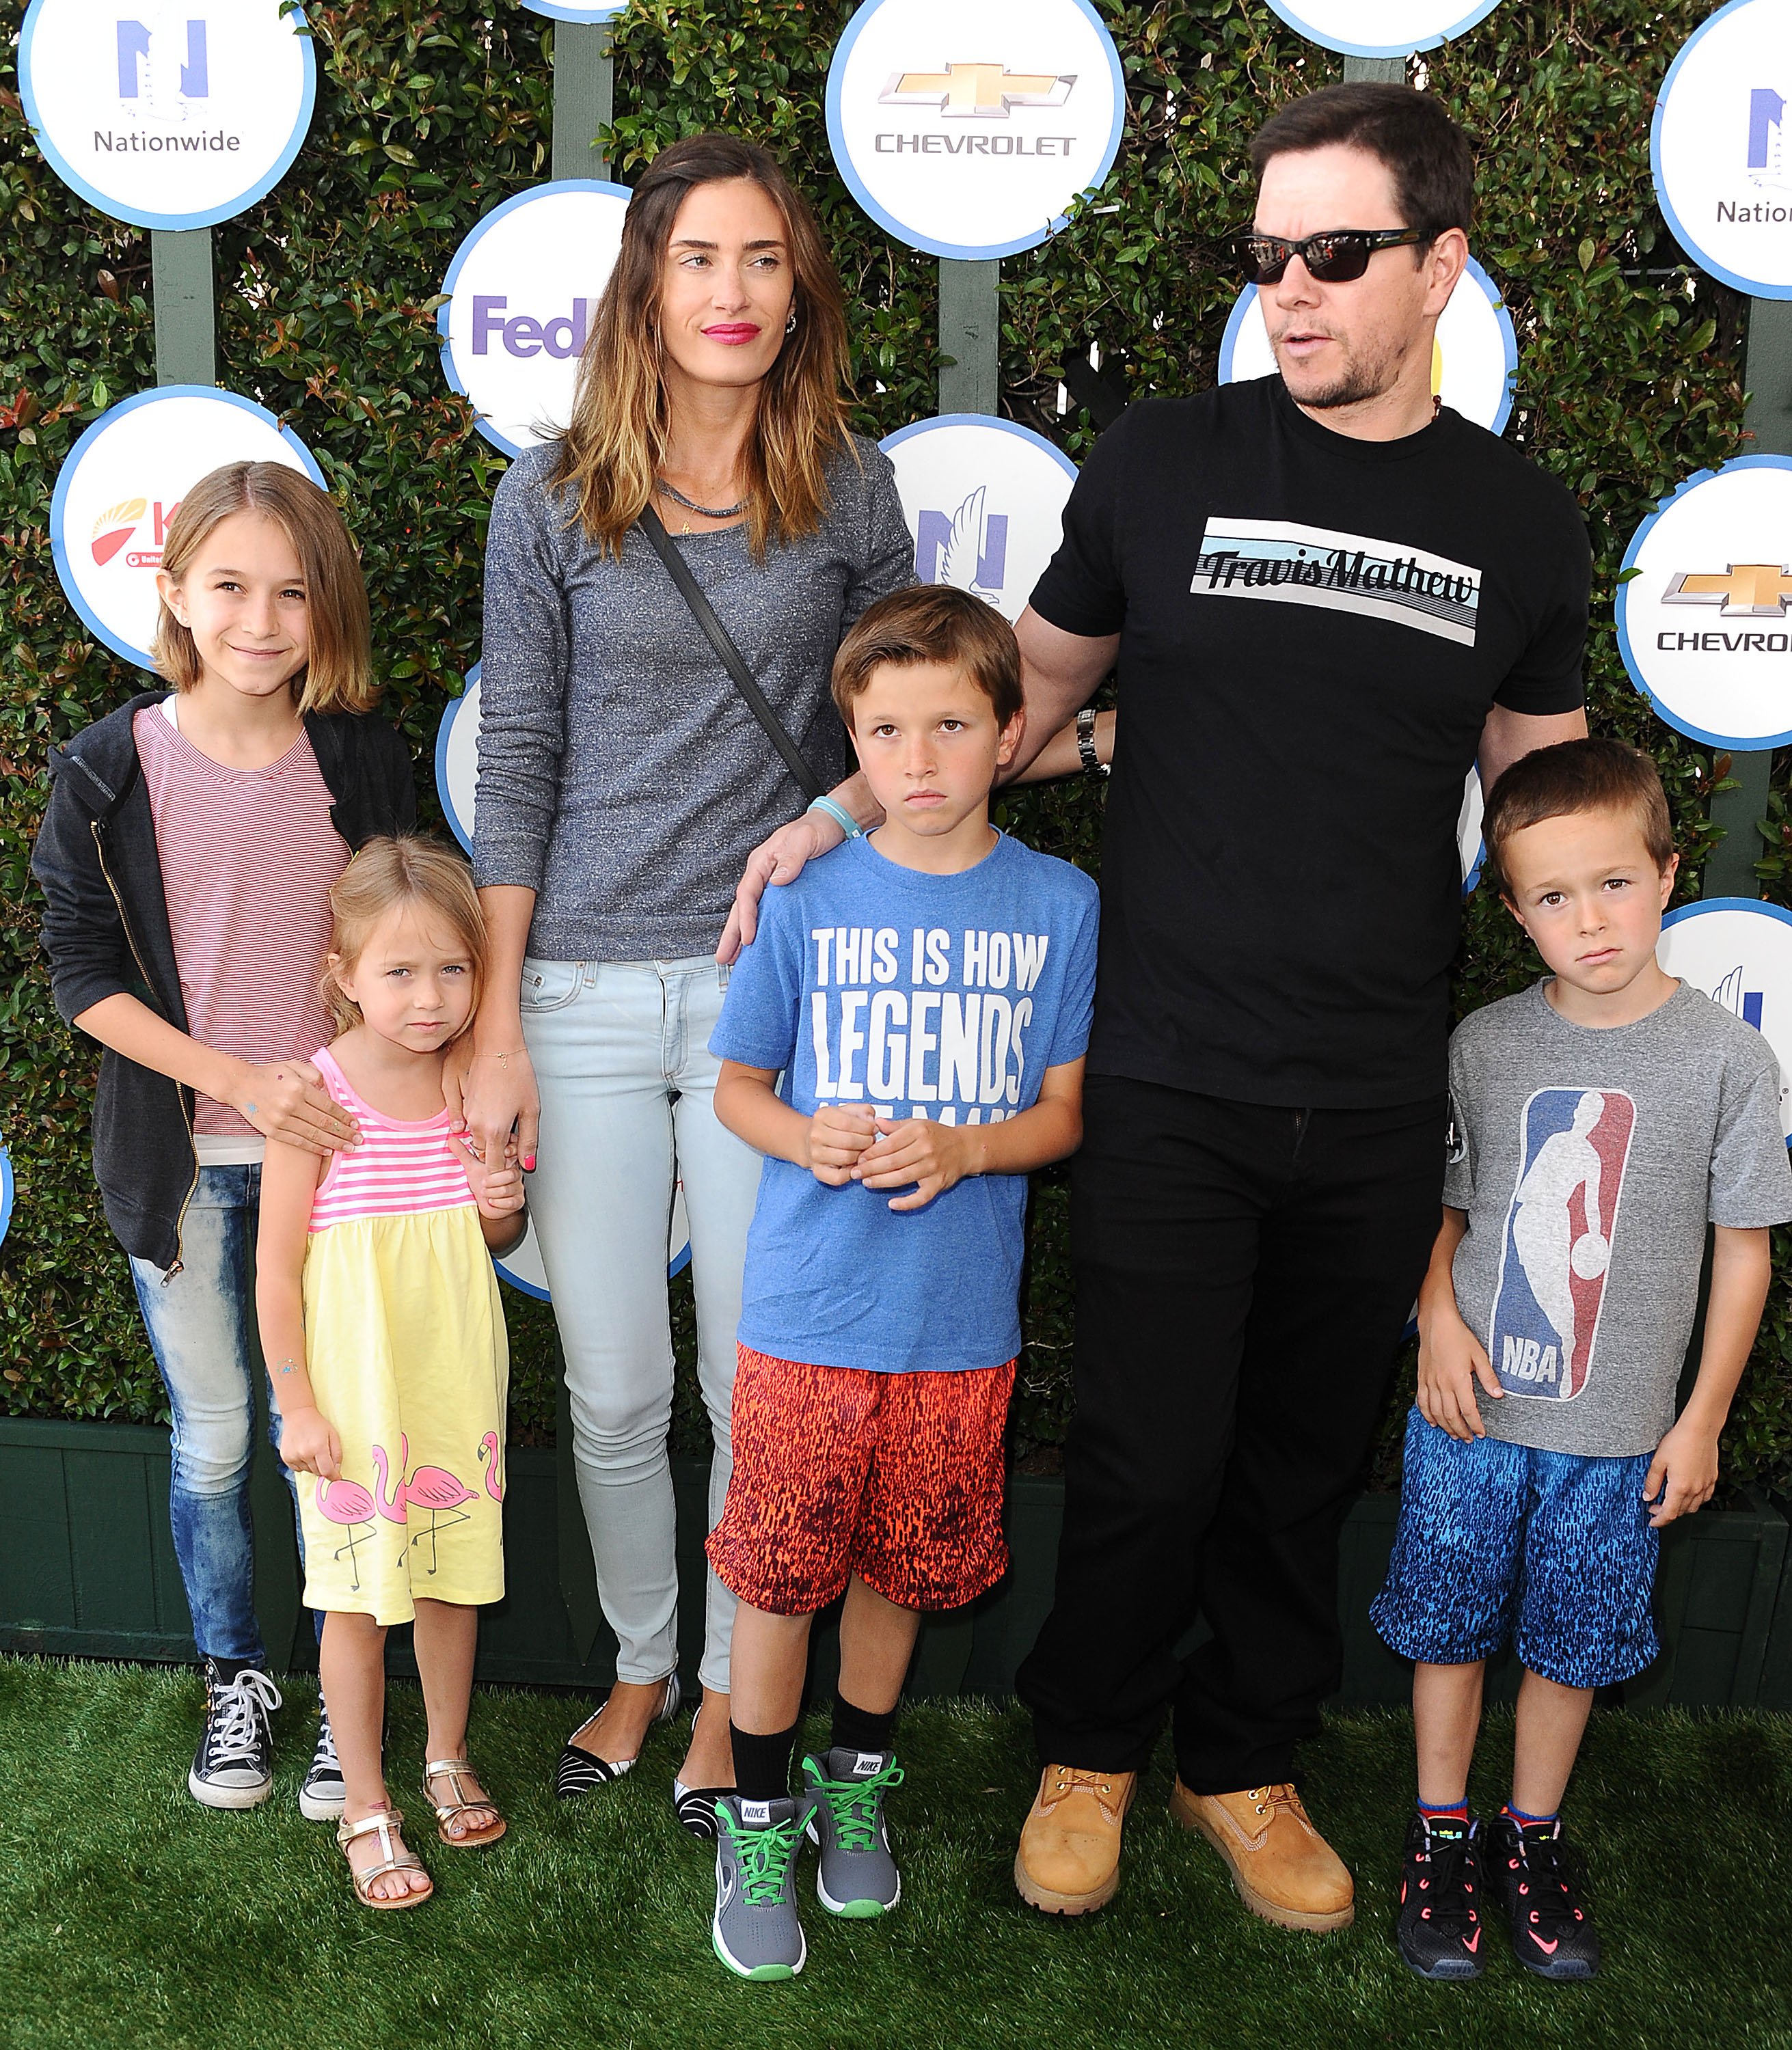 Actor Mark Wahlberg with wife Rhea Durham and their children Ella Rae, Michael, Brendan and Grace at The Lot on April 26, 2015 in West Hollywood, California. | Source: Getty Images